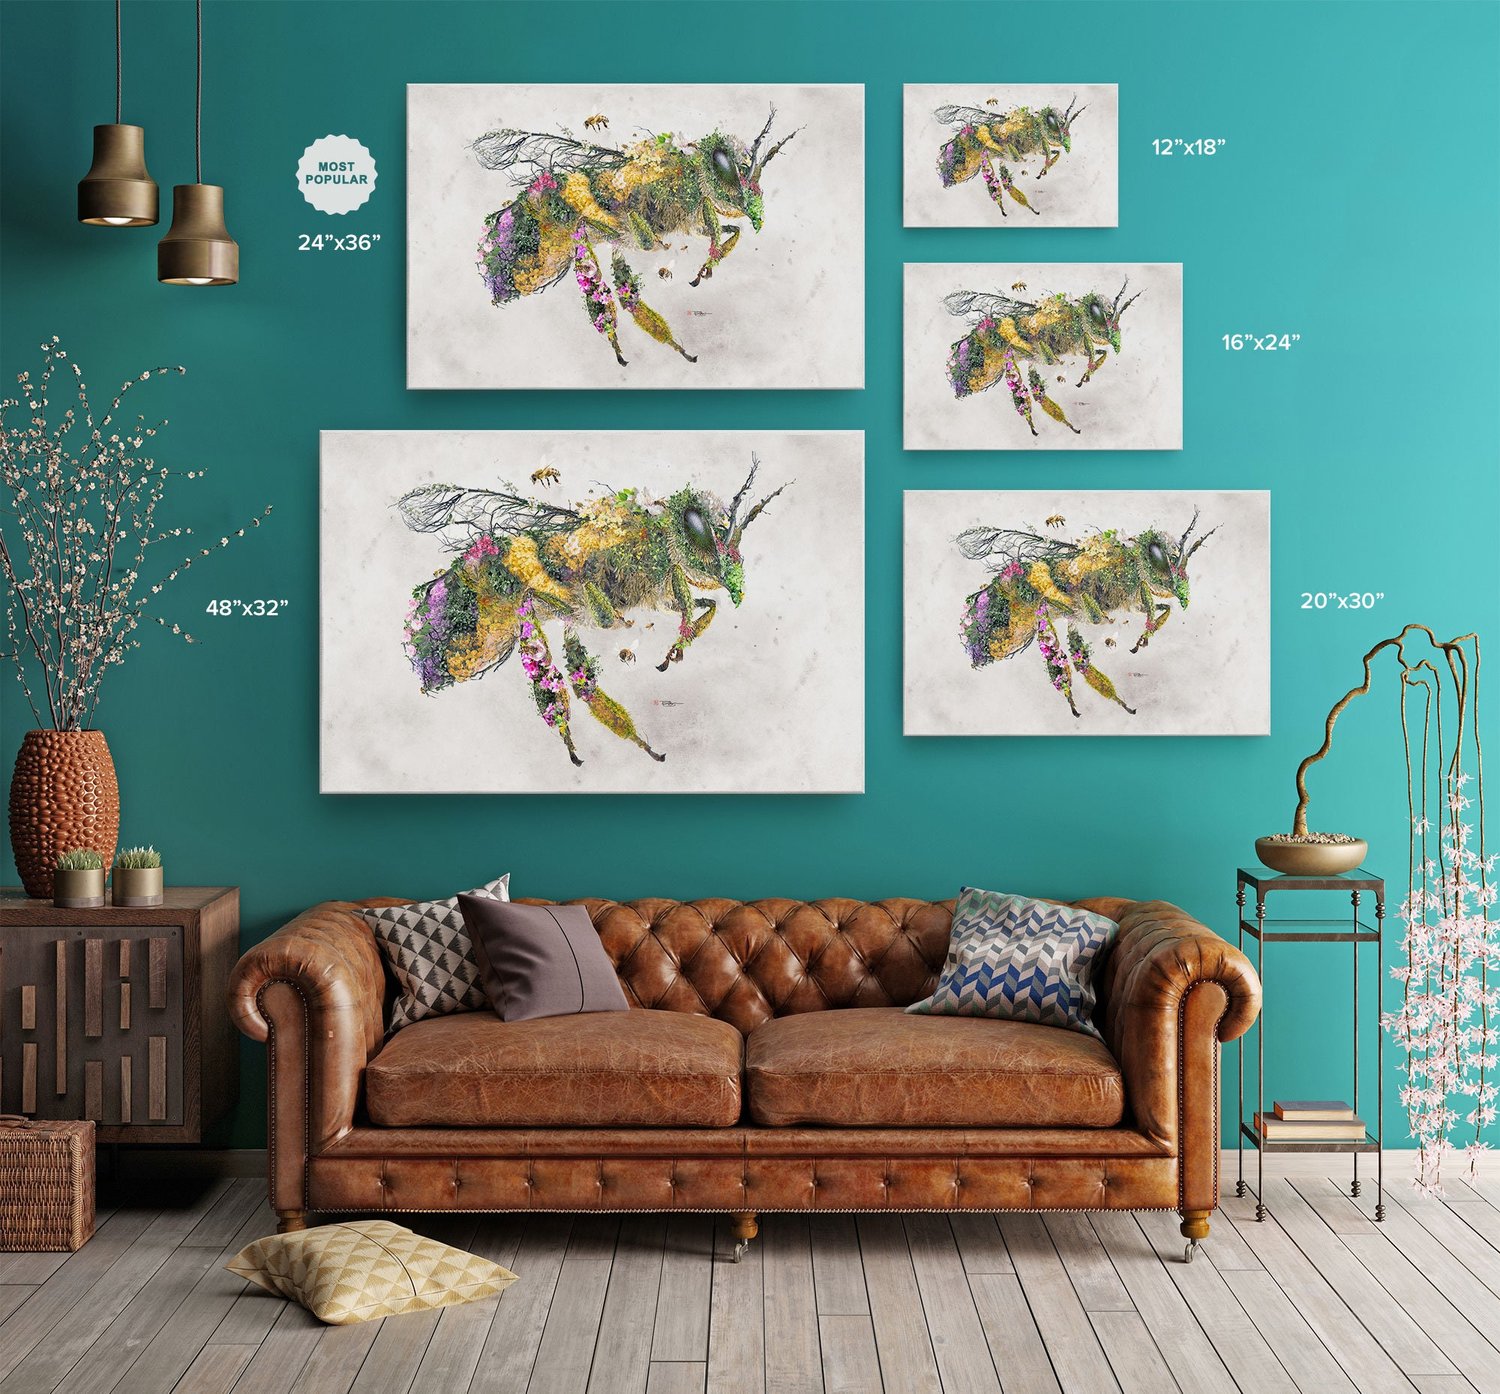 Bee Happy | Large Solid-Faced Canvas Wall Art Print | Great Big Canvas